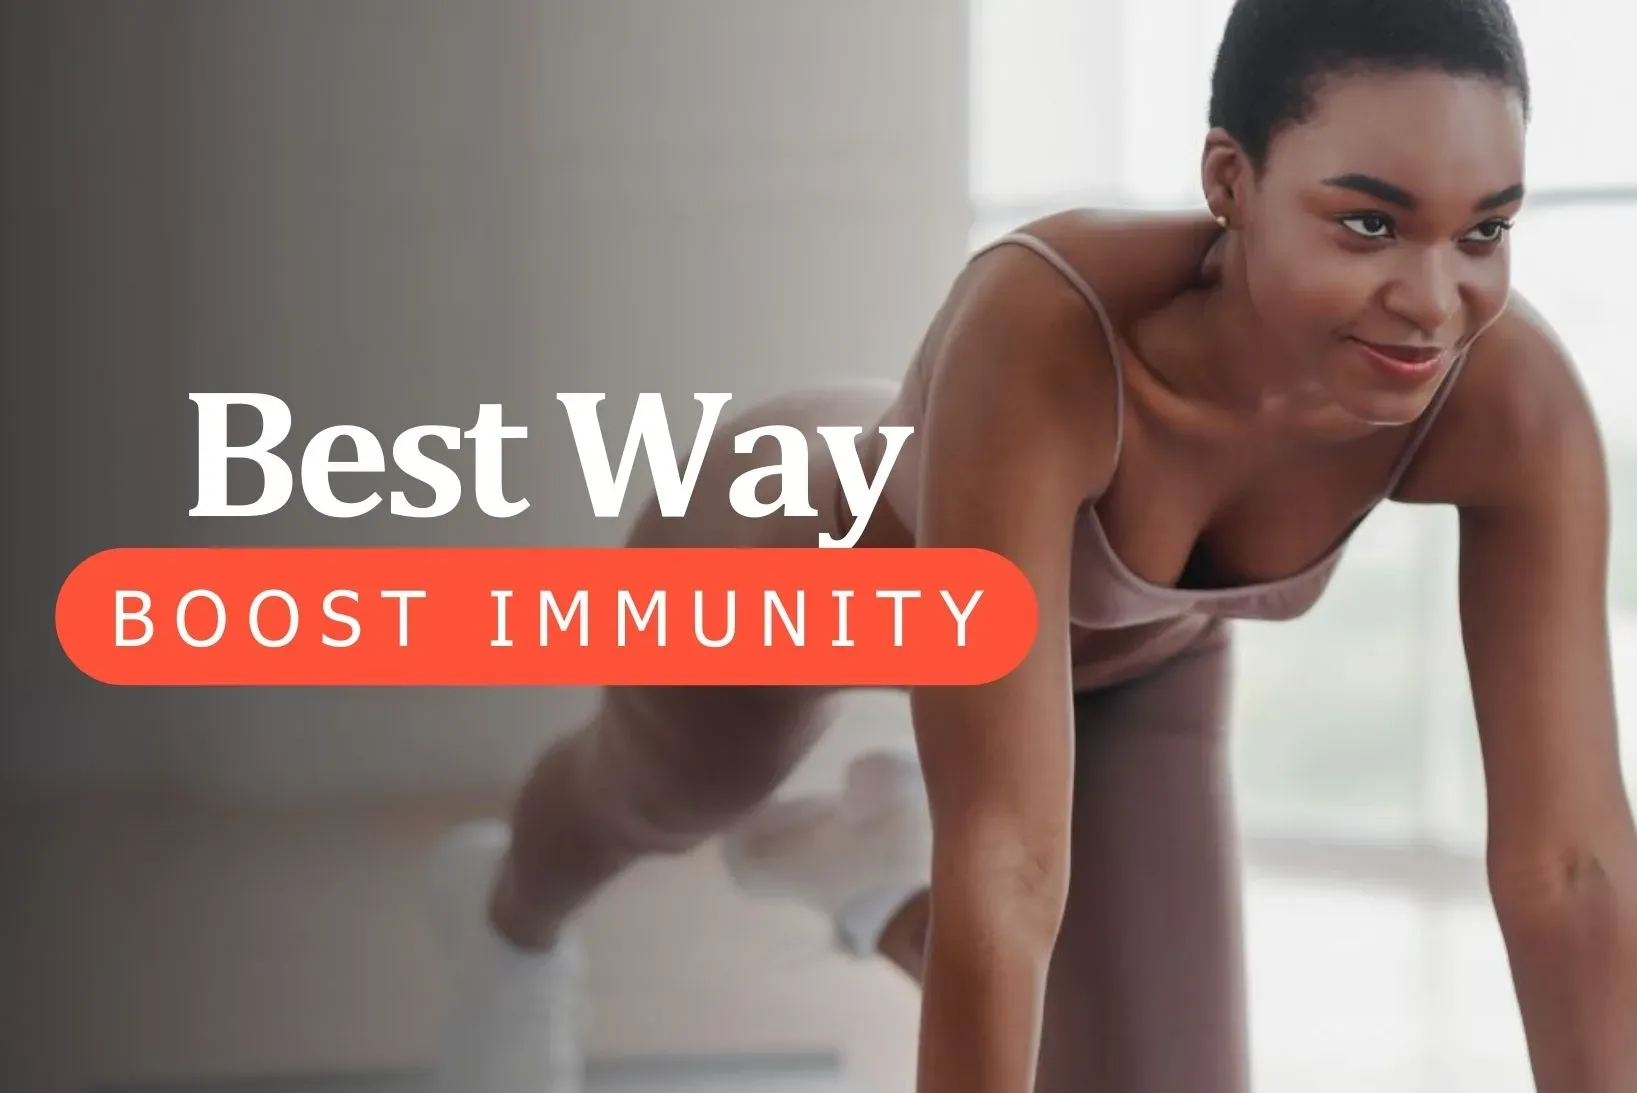 Effective Foods and Ways to Boost Immunity in the Body